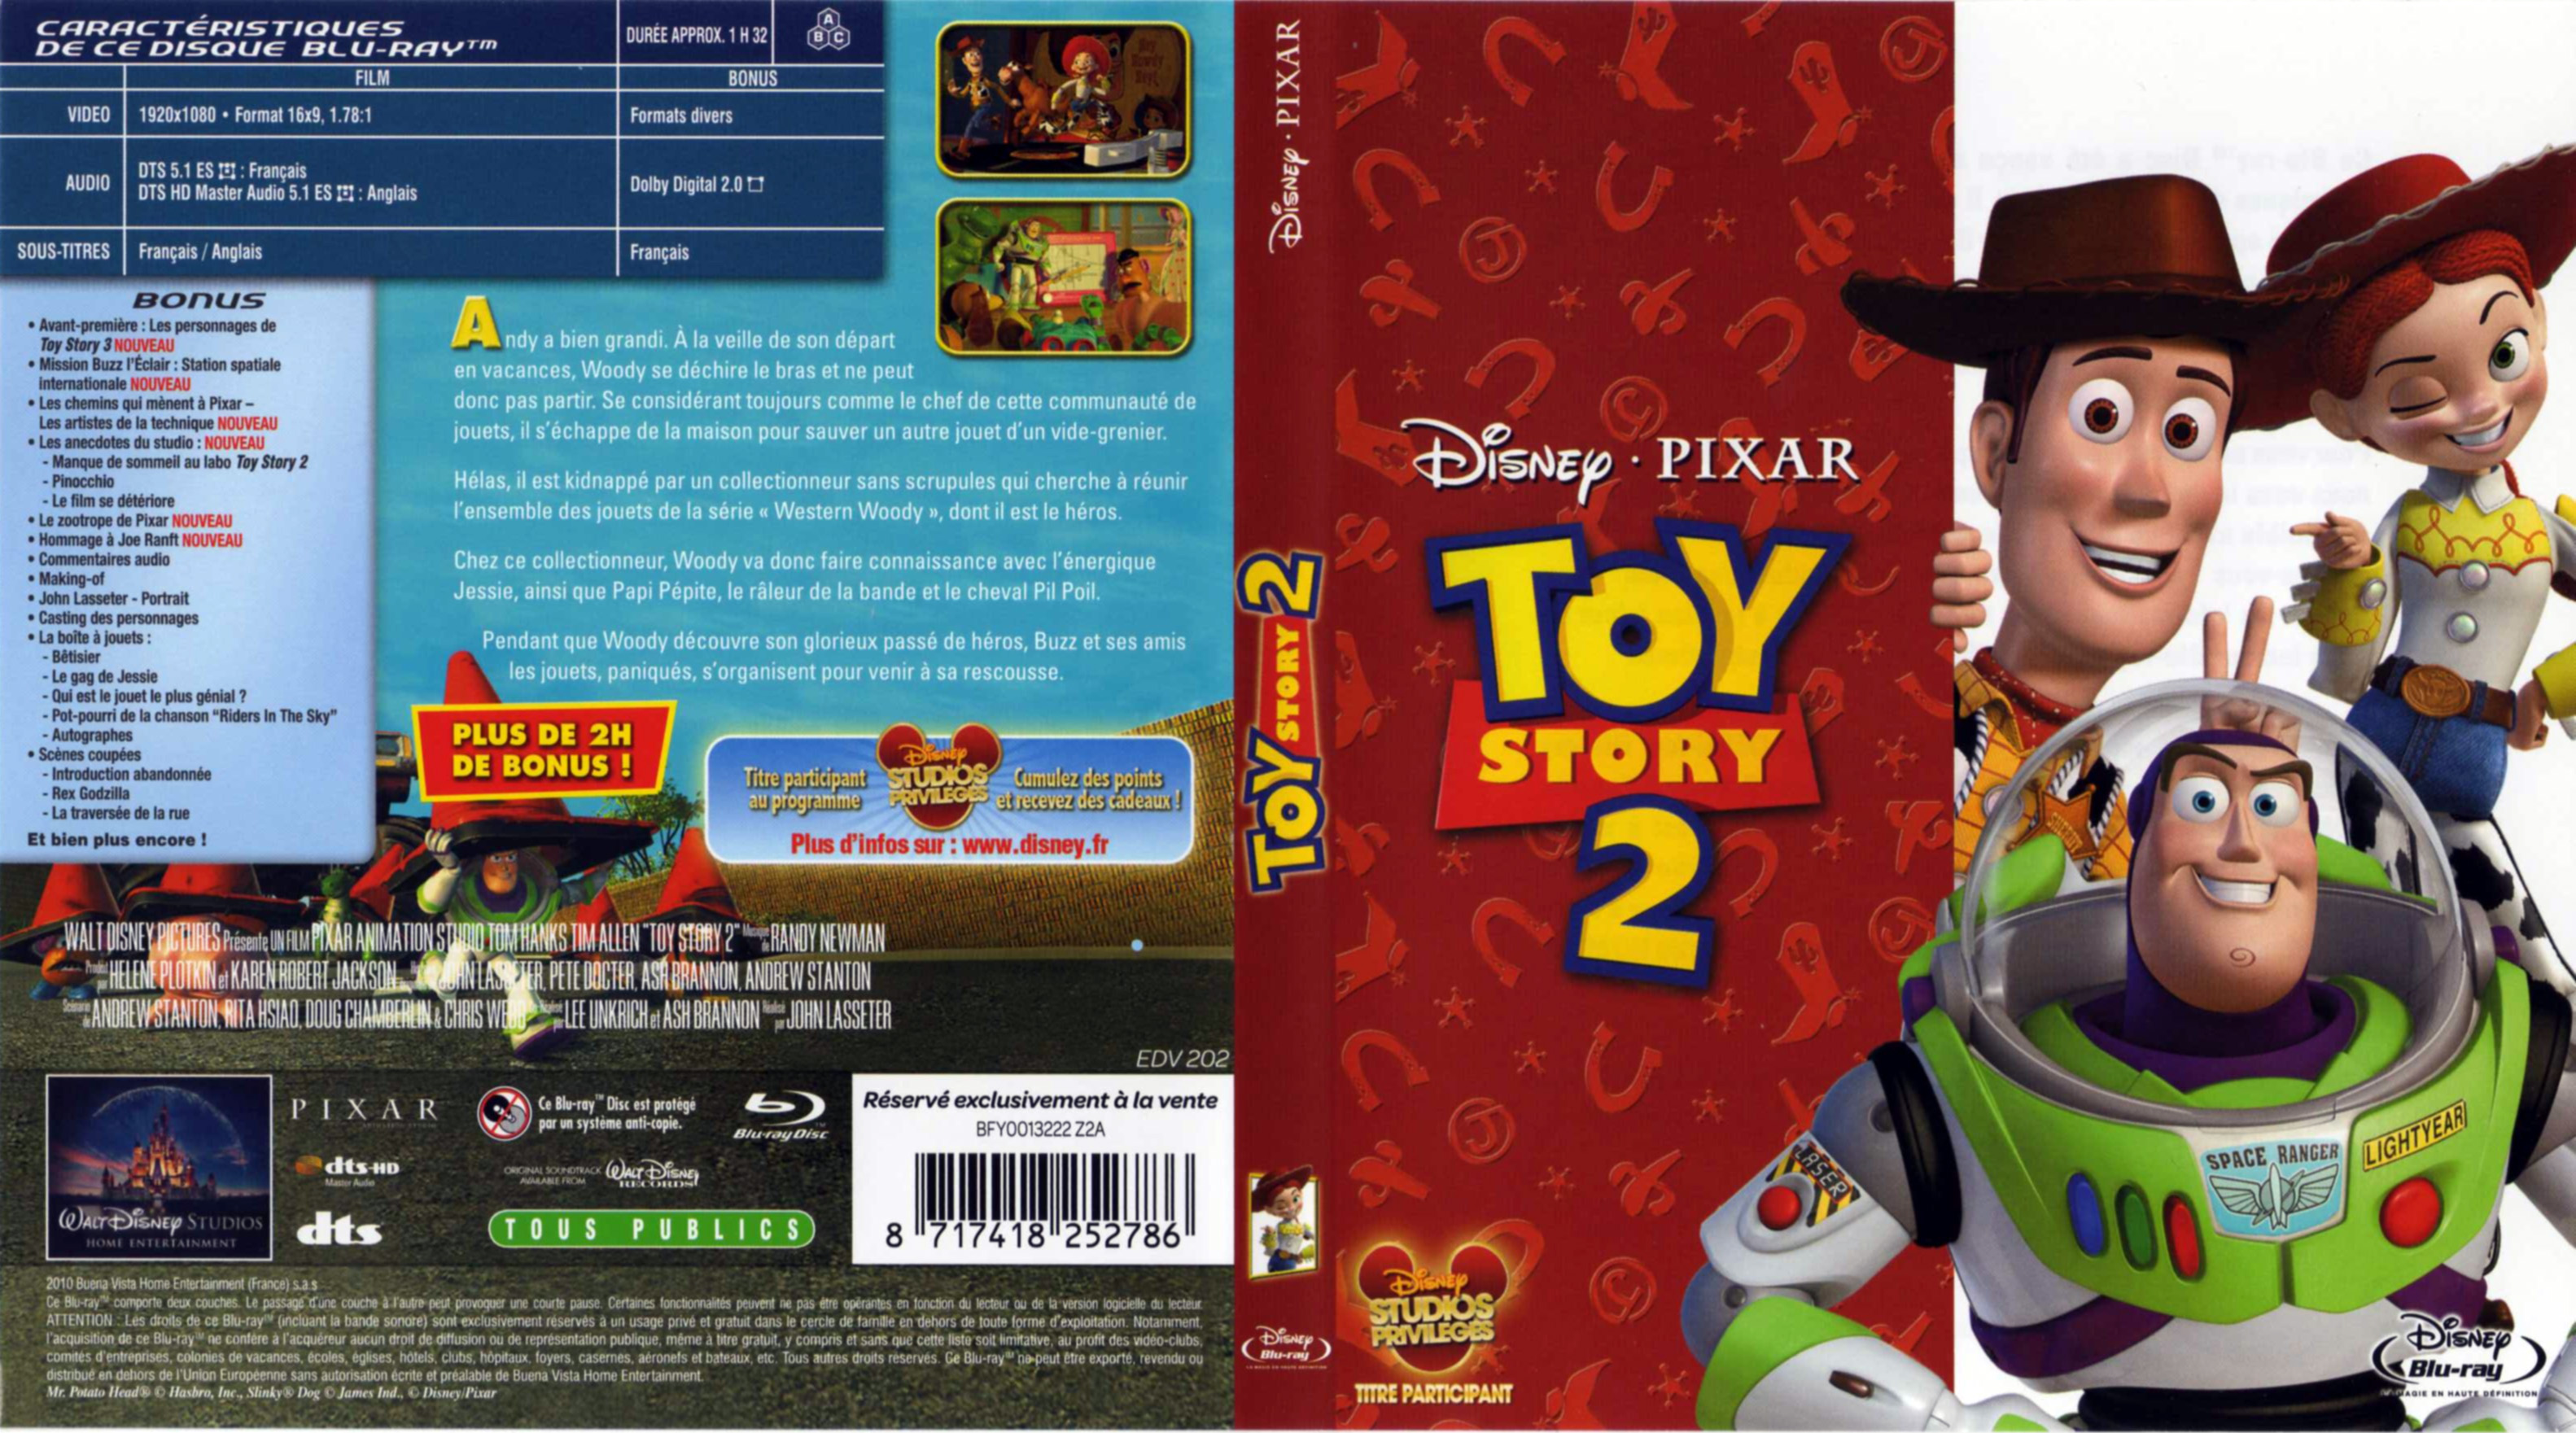 Jaquette DVD Toy Story 2 (BLU-RAY)